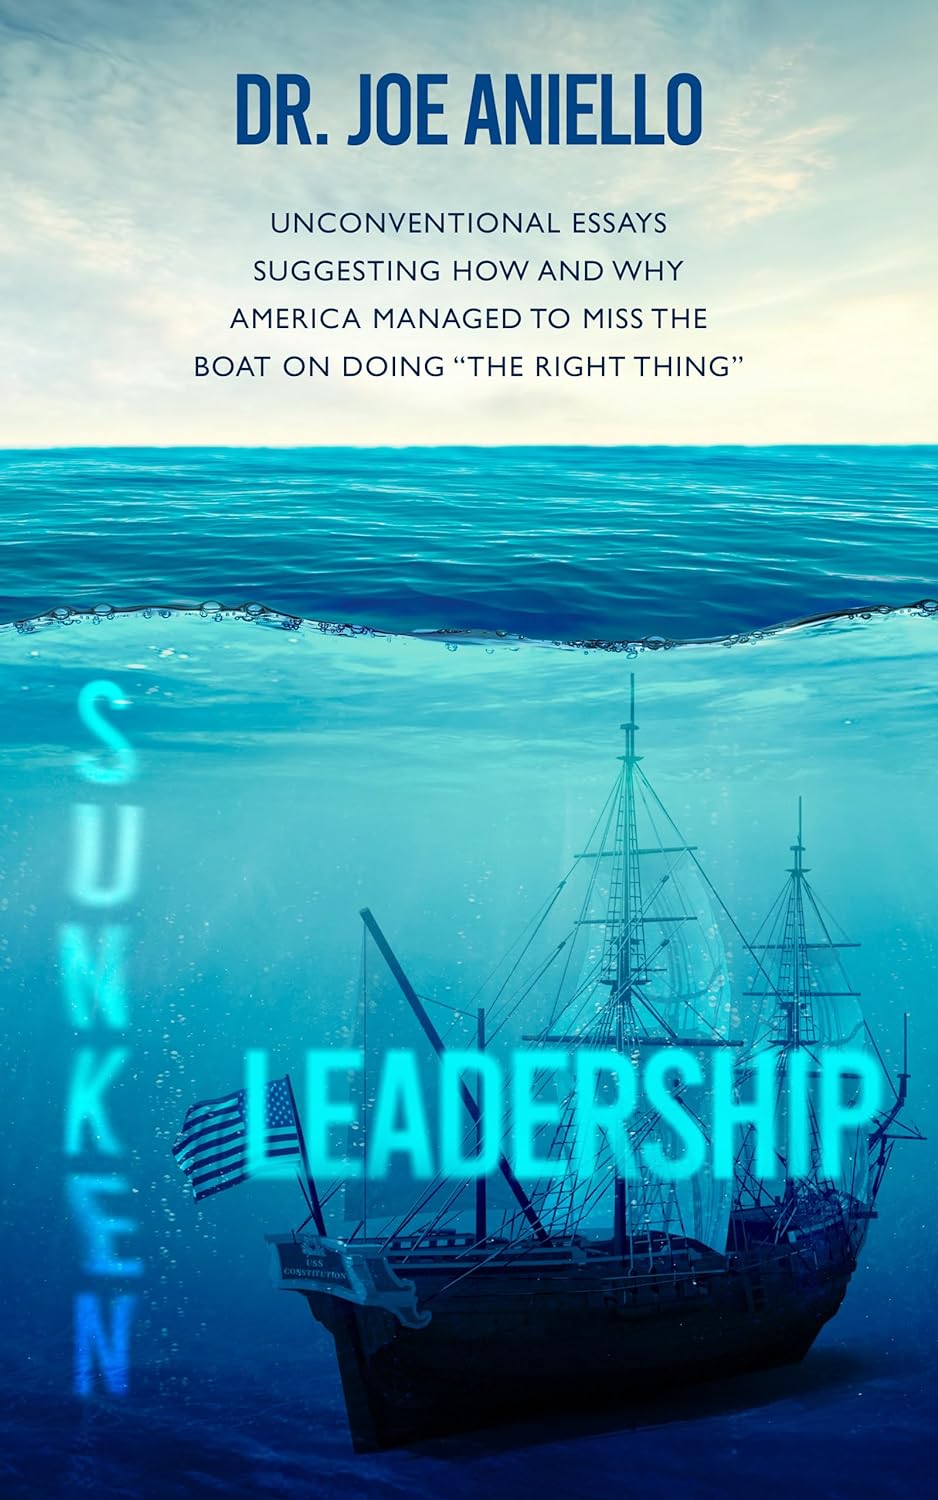 New book "Sunken Leadership" by Dr. Joe Aniello is released, an urgent call for rethinking leadership in America’s tense political landscape